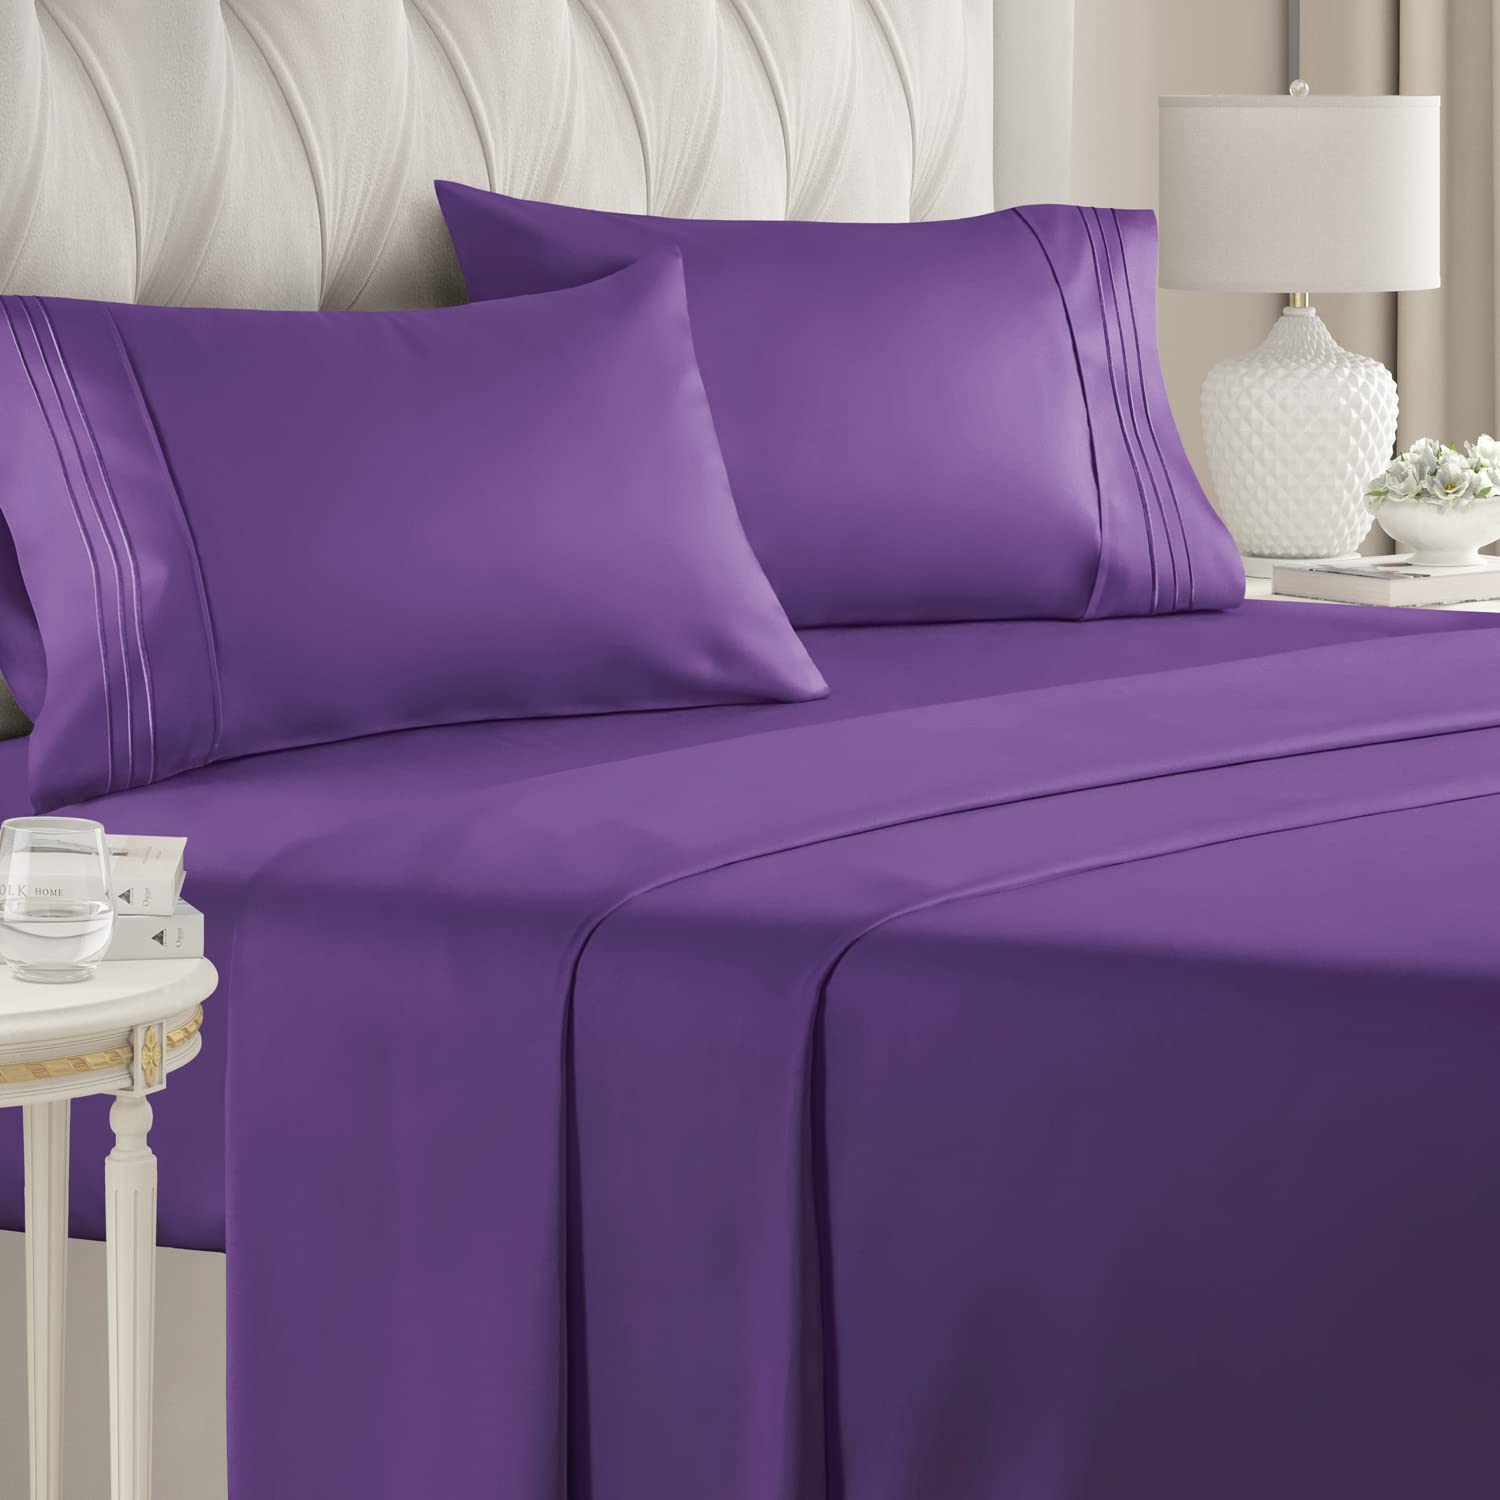 Book Cover Twin XL Sheet Set - 4 Piece Sheets - Dorm Room Bed Sheets - Hotel Luxury Bed Sheets - Extra Soft - Deep Bed Sheets Pockets - Easy Fit - Breathable & Cooling Touch - Twin XL Sheets for Twin XL Mattress 08 - Purple Twin XL